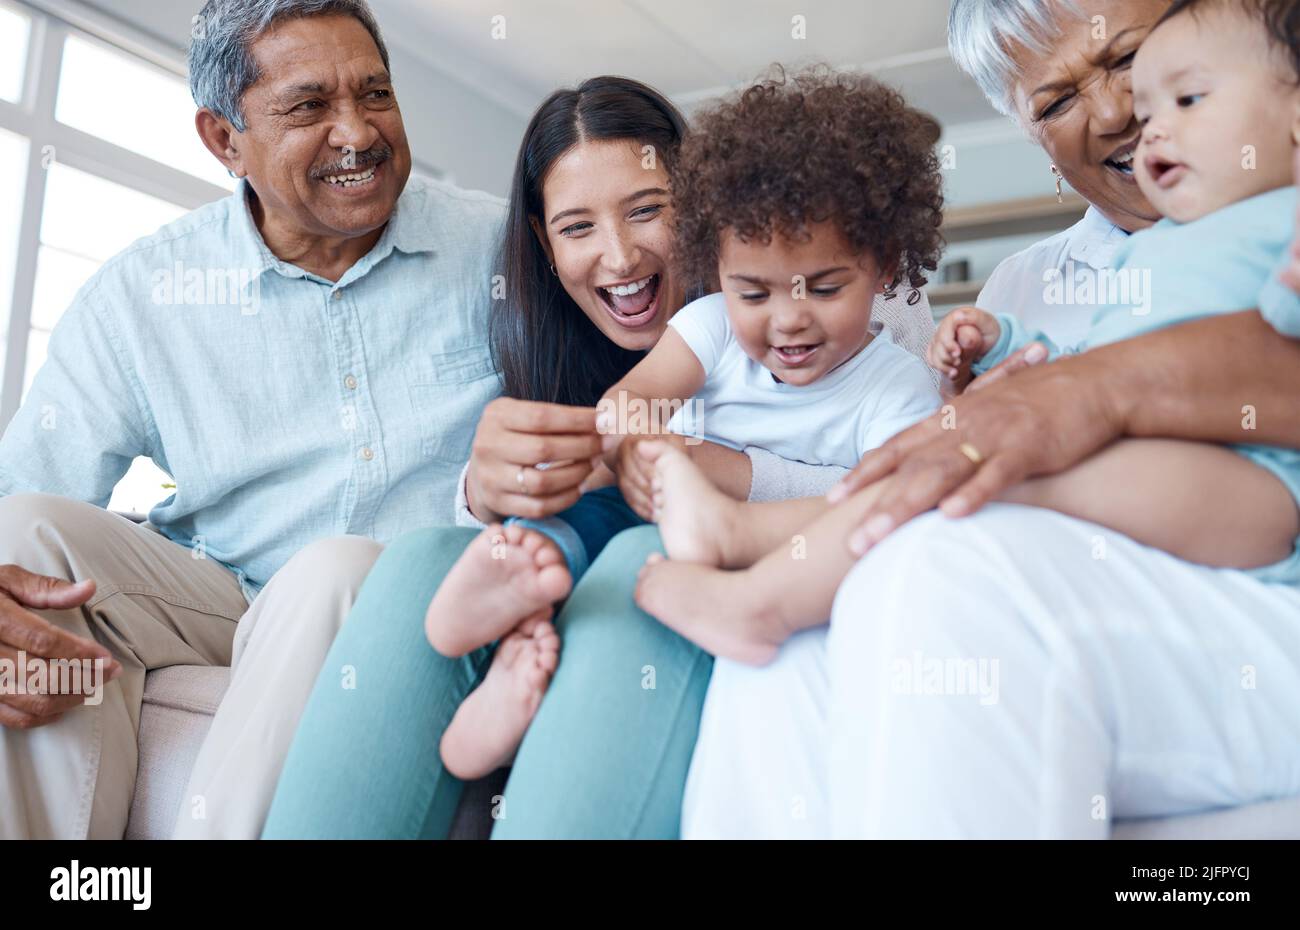 Always loved here. Shot of a beautiful family bonding on a sofa at home. Stock Photo